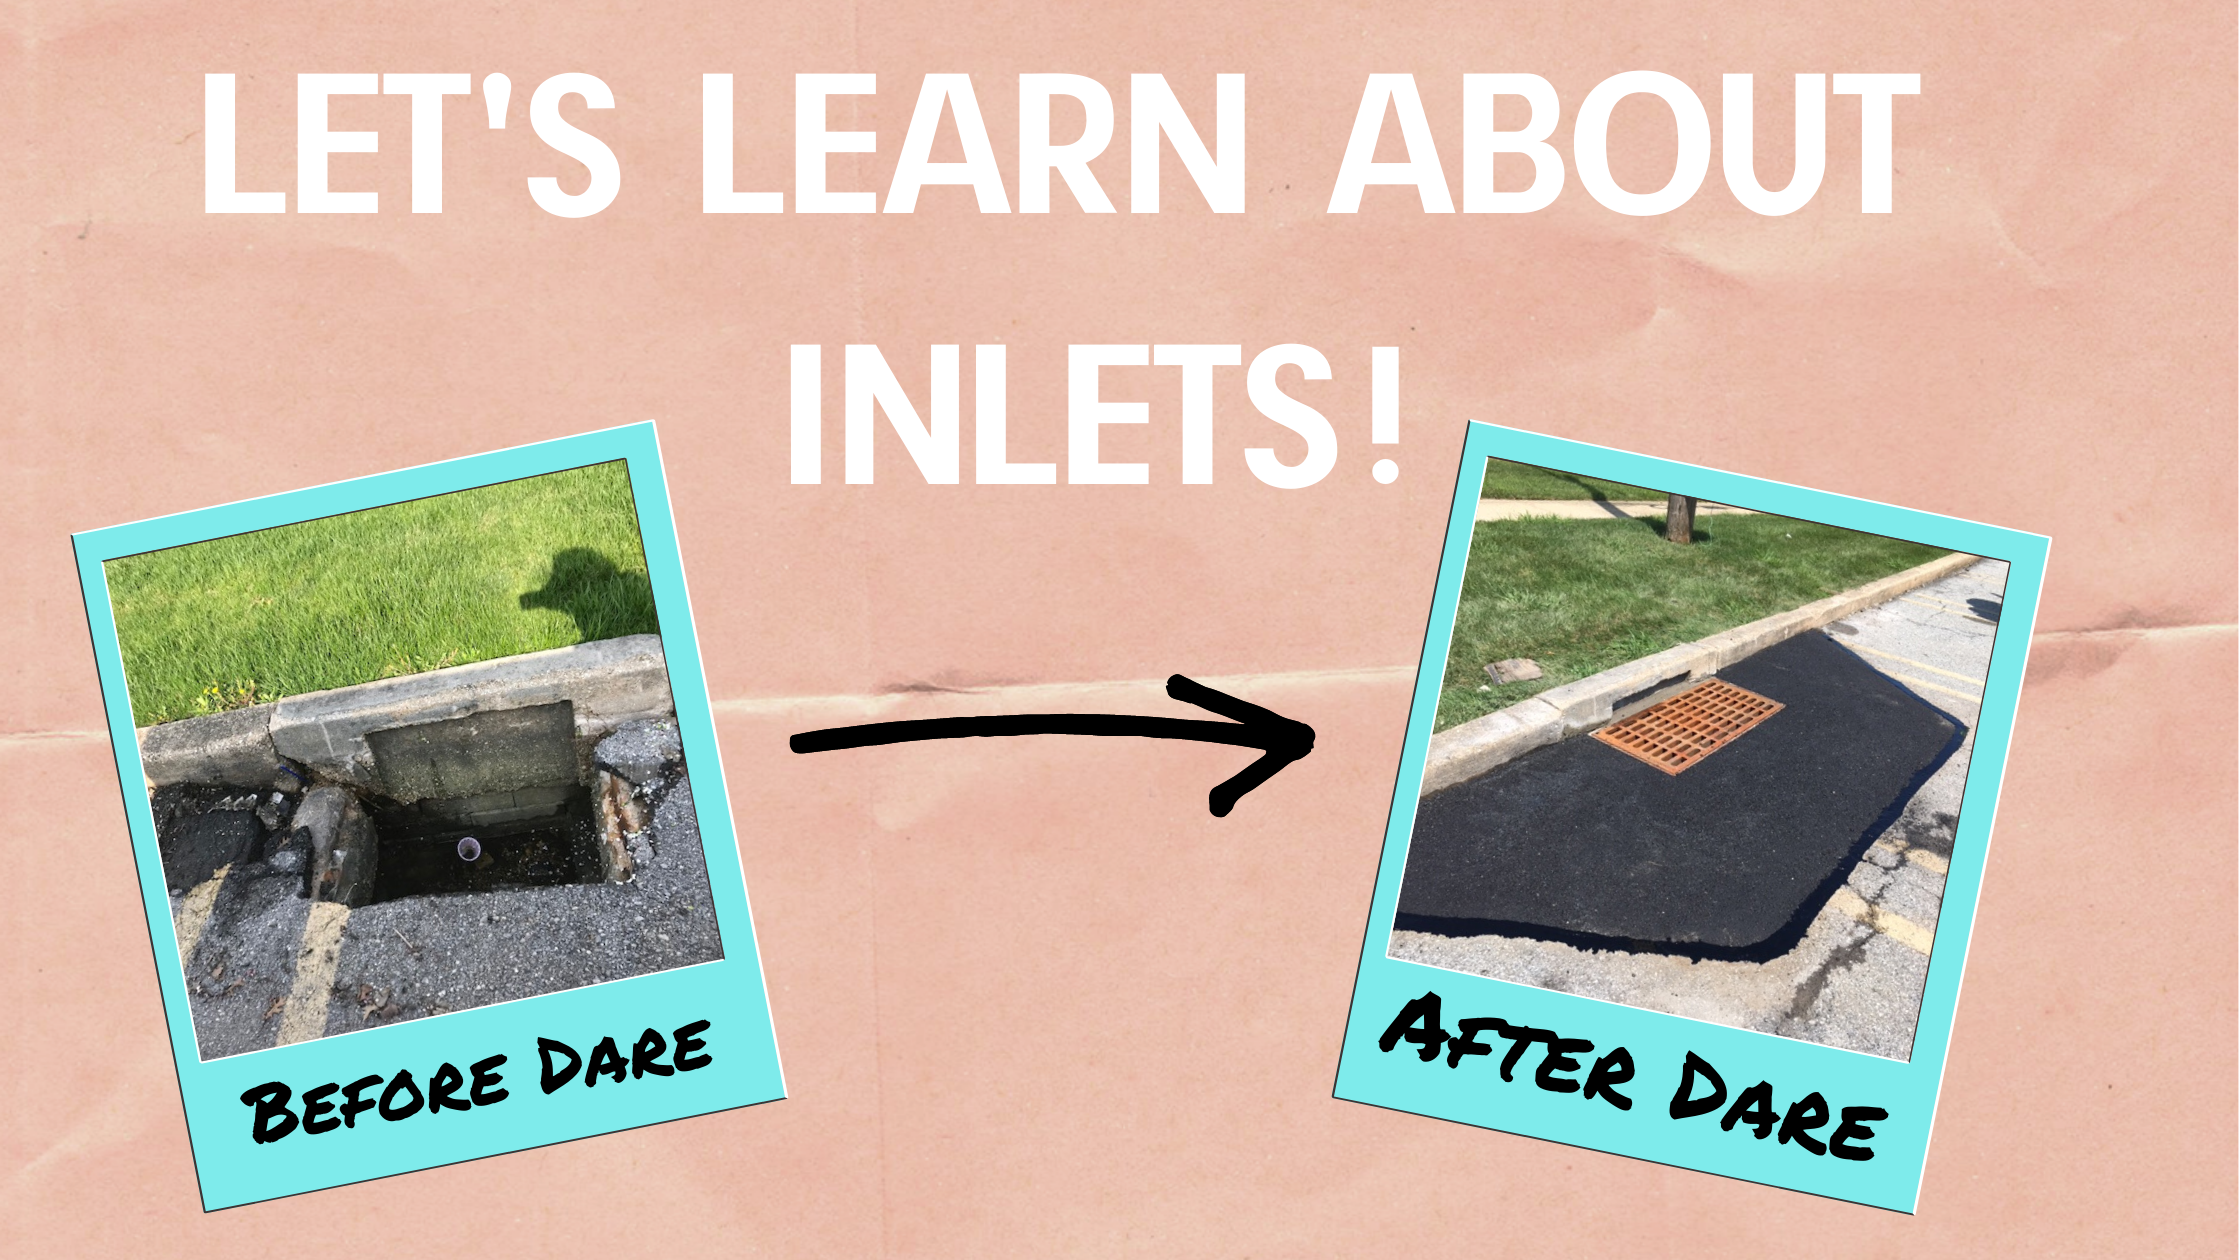 Let's Learn About Inlets! A photo of a damaged inlet with, "Before Dare" written underneath. A Photo of that same inlet after it has been repaired with, "After Dare" written underneath.